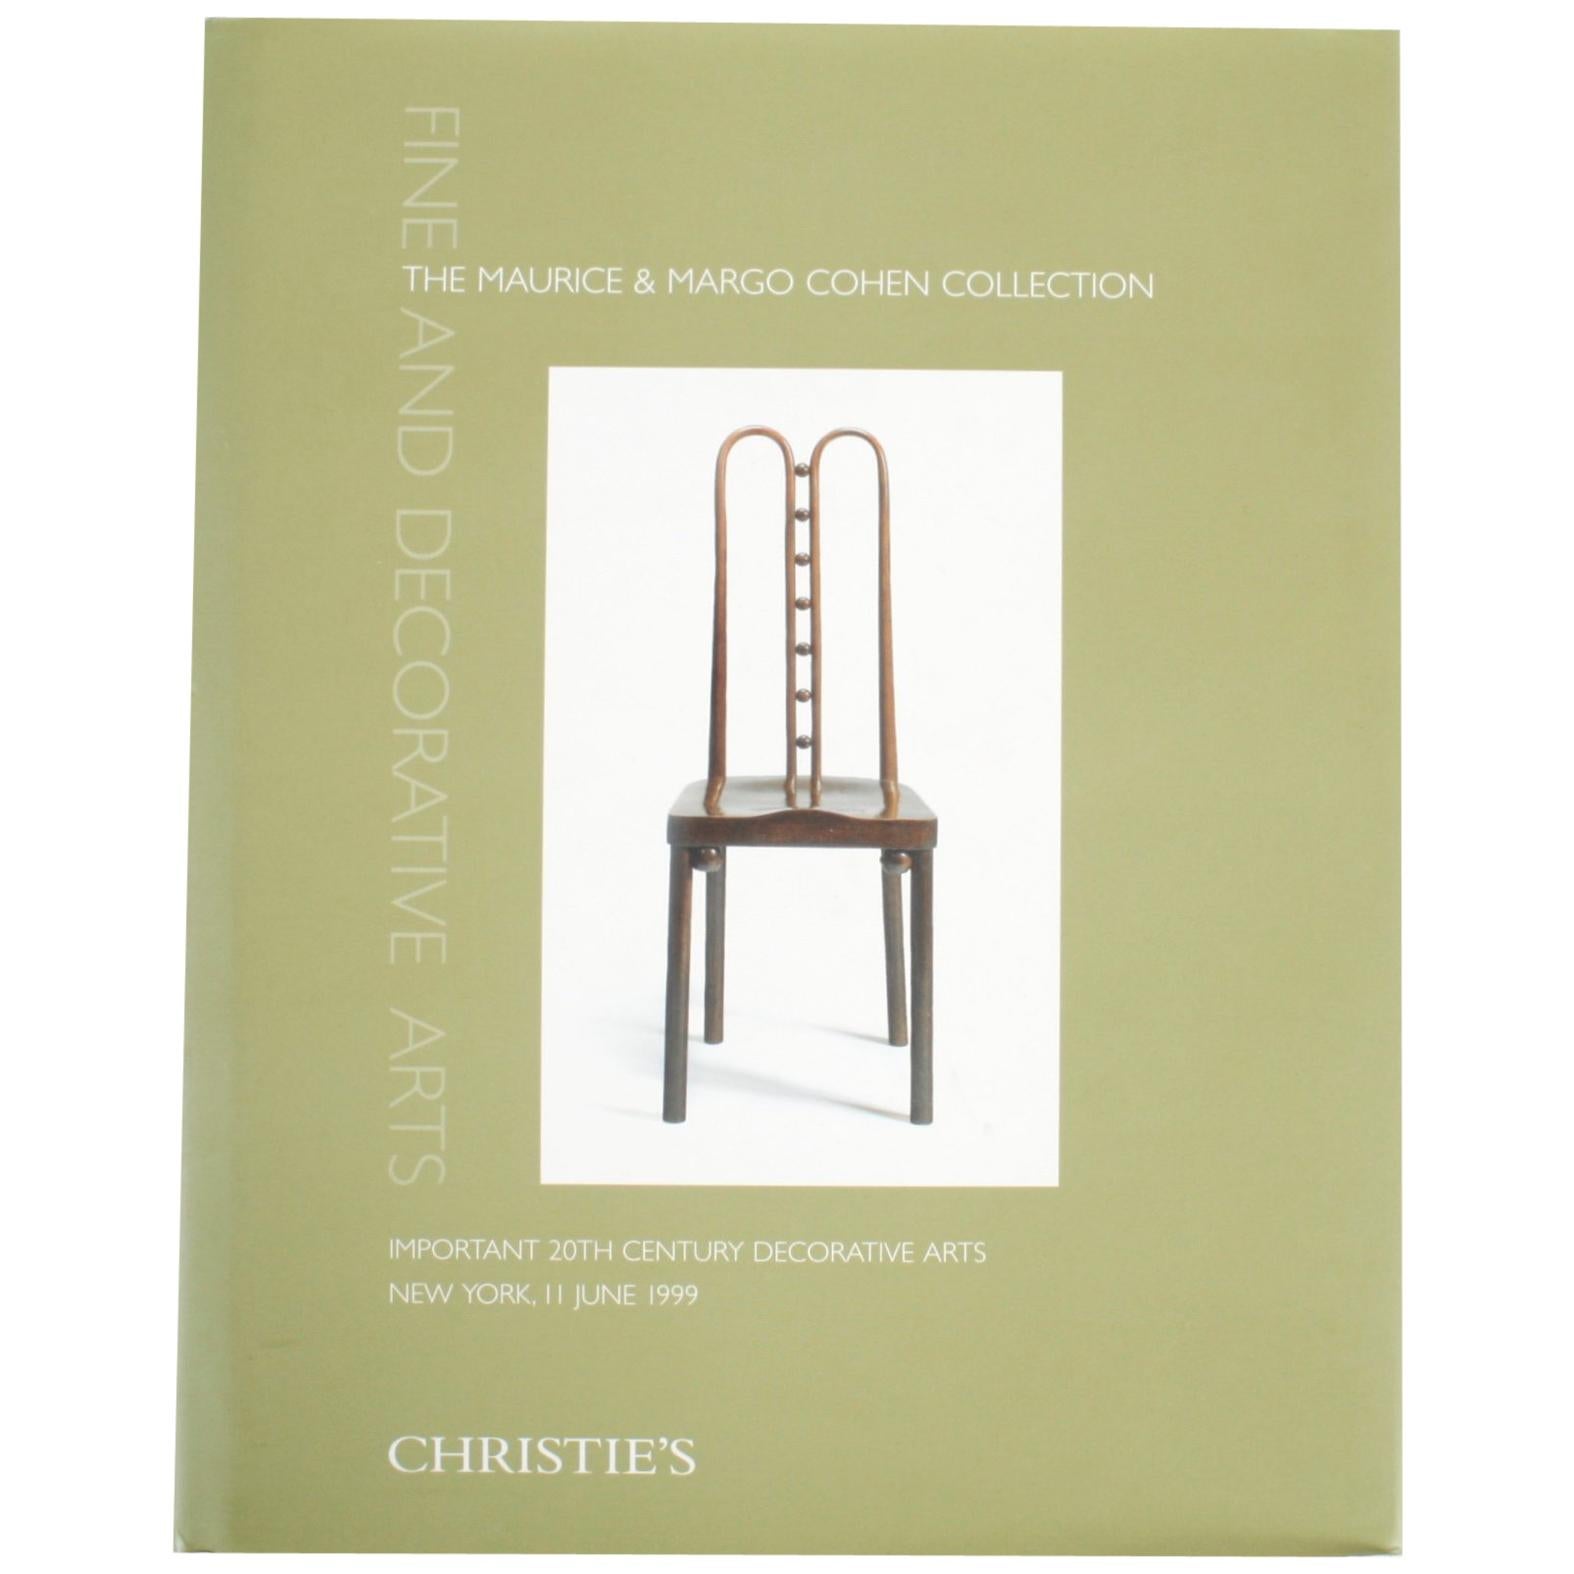 Christie's: Fine and Decorative Arts: The Maurice & Margo Cohen Collection, 5/99